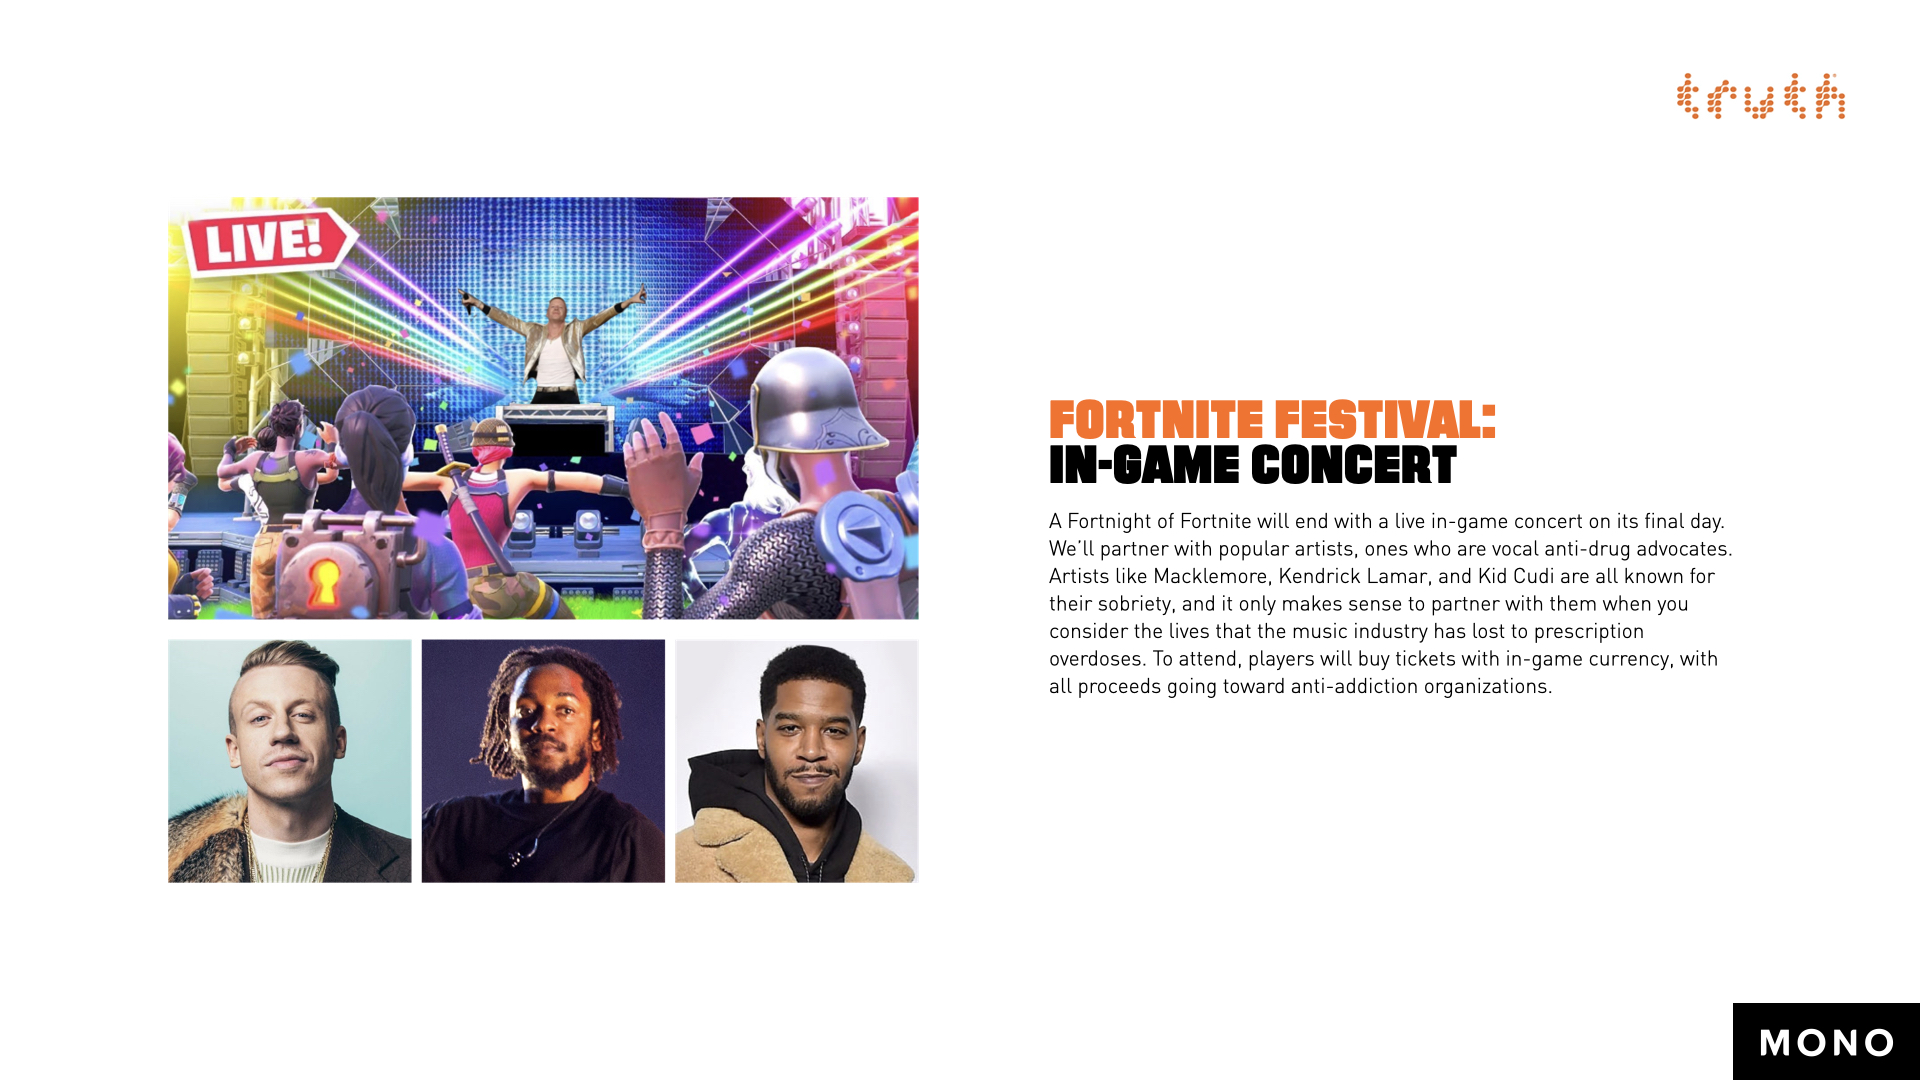 Fortnite Festival: In-Game Concert. A Fortnight of Fortnite will end with a live in-game concert on its final day. We’ll partner with popular artists, ones who are vocal anti-drug advocates. Artists like Macklemore, Kendrick Lamar, and Kid Cudi are all known for their sobriety, and it only makes sense to partner with them when you consider the lives that the music industry has lost to prescription overdoses. To attend, players will buy tickets with in-game currency, with all proceeds going toward anti-addiction organizations.